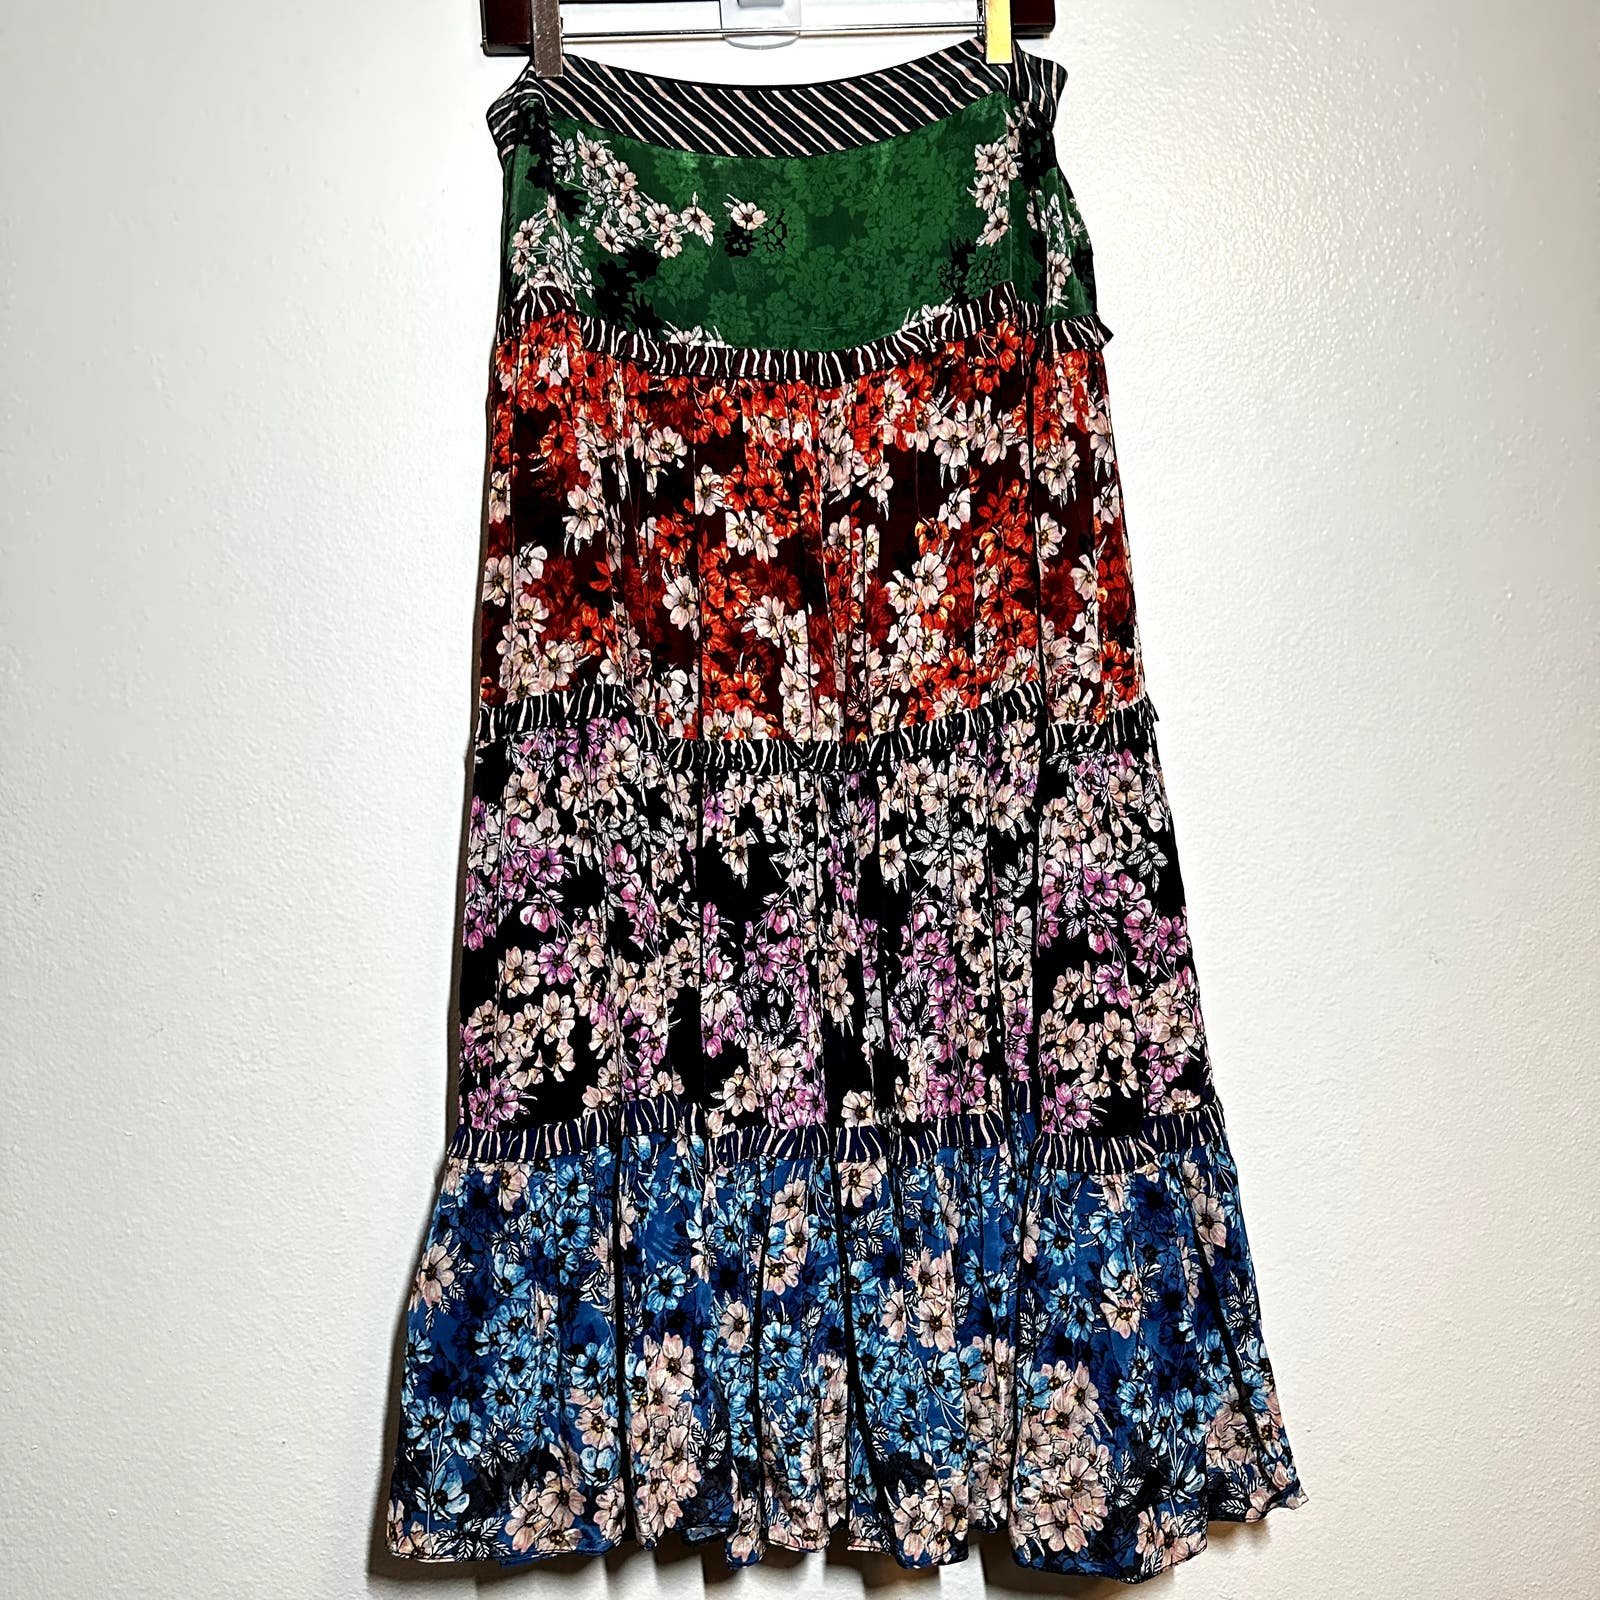 save up to 70% Anthropologie Bhanuni Maxi Skirt Tiered Floral Print Crepe A-Line Multicolor 10 fHpp1kqBG on sale